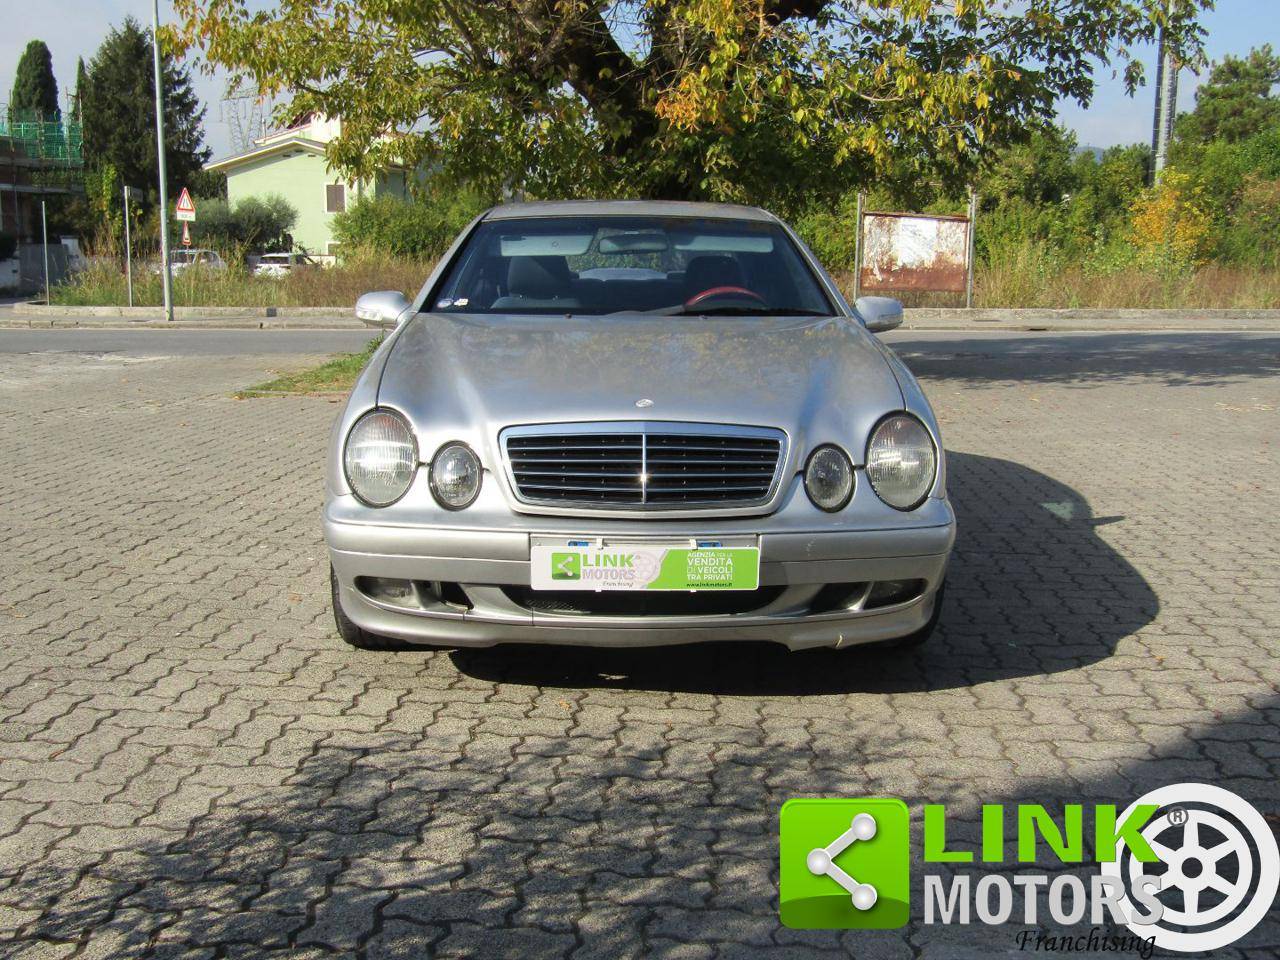 For Sale: Mercedes-Benz CLK 200 (2000) offered for €3,600